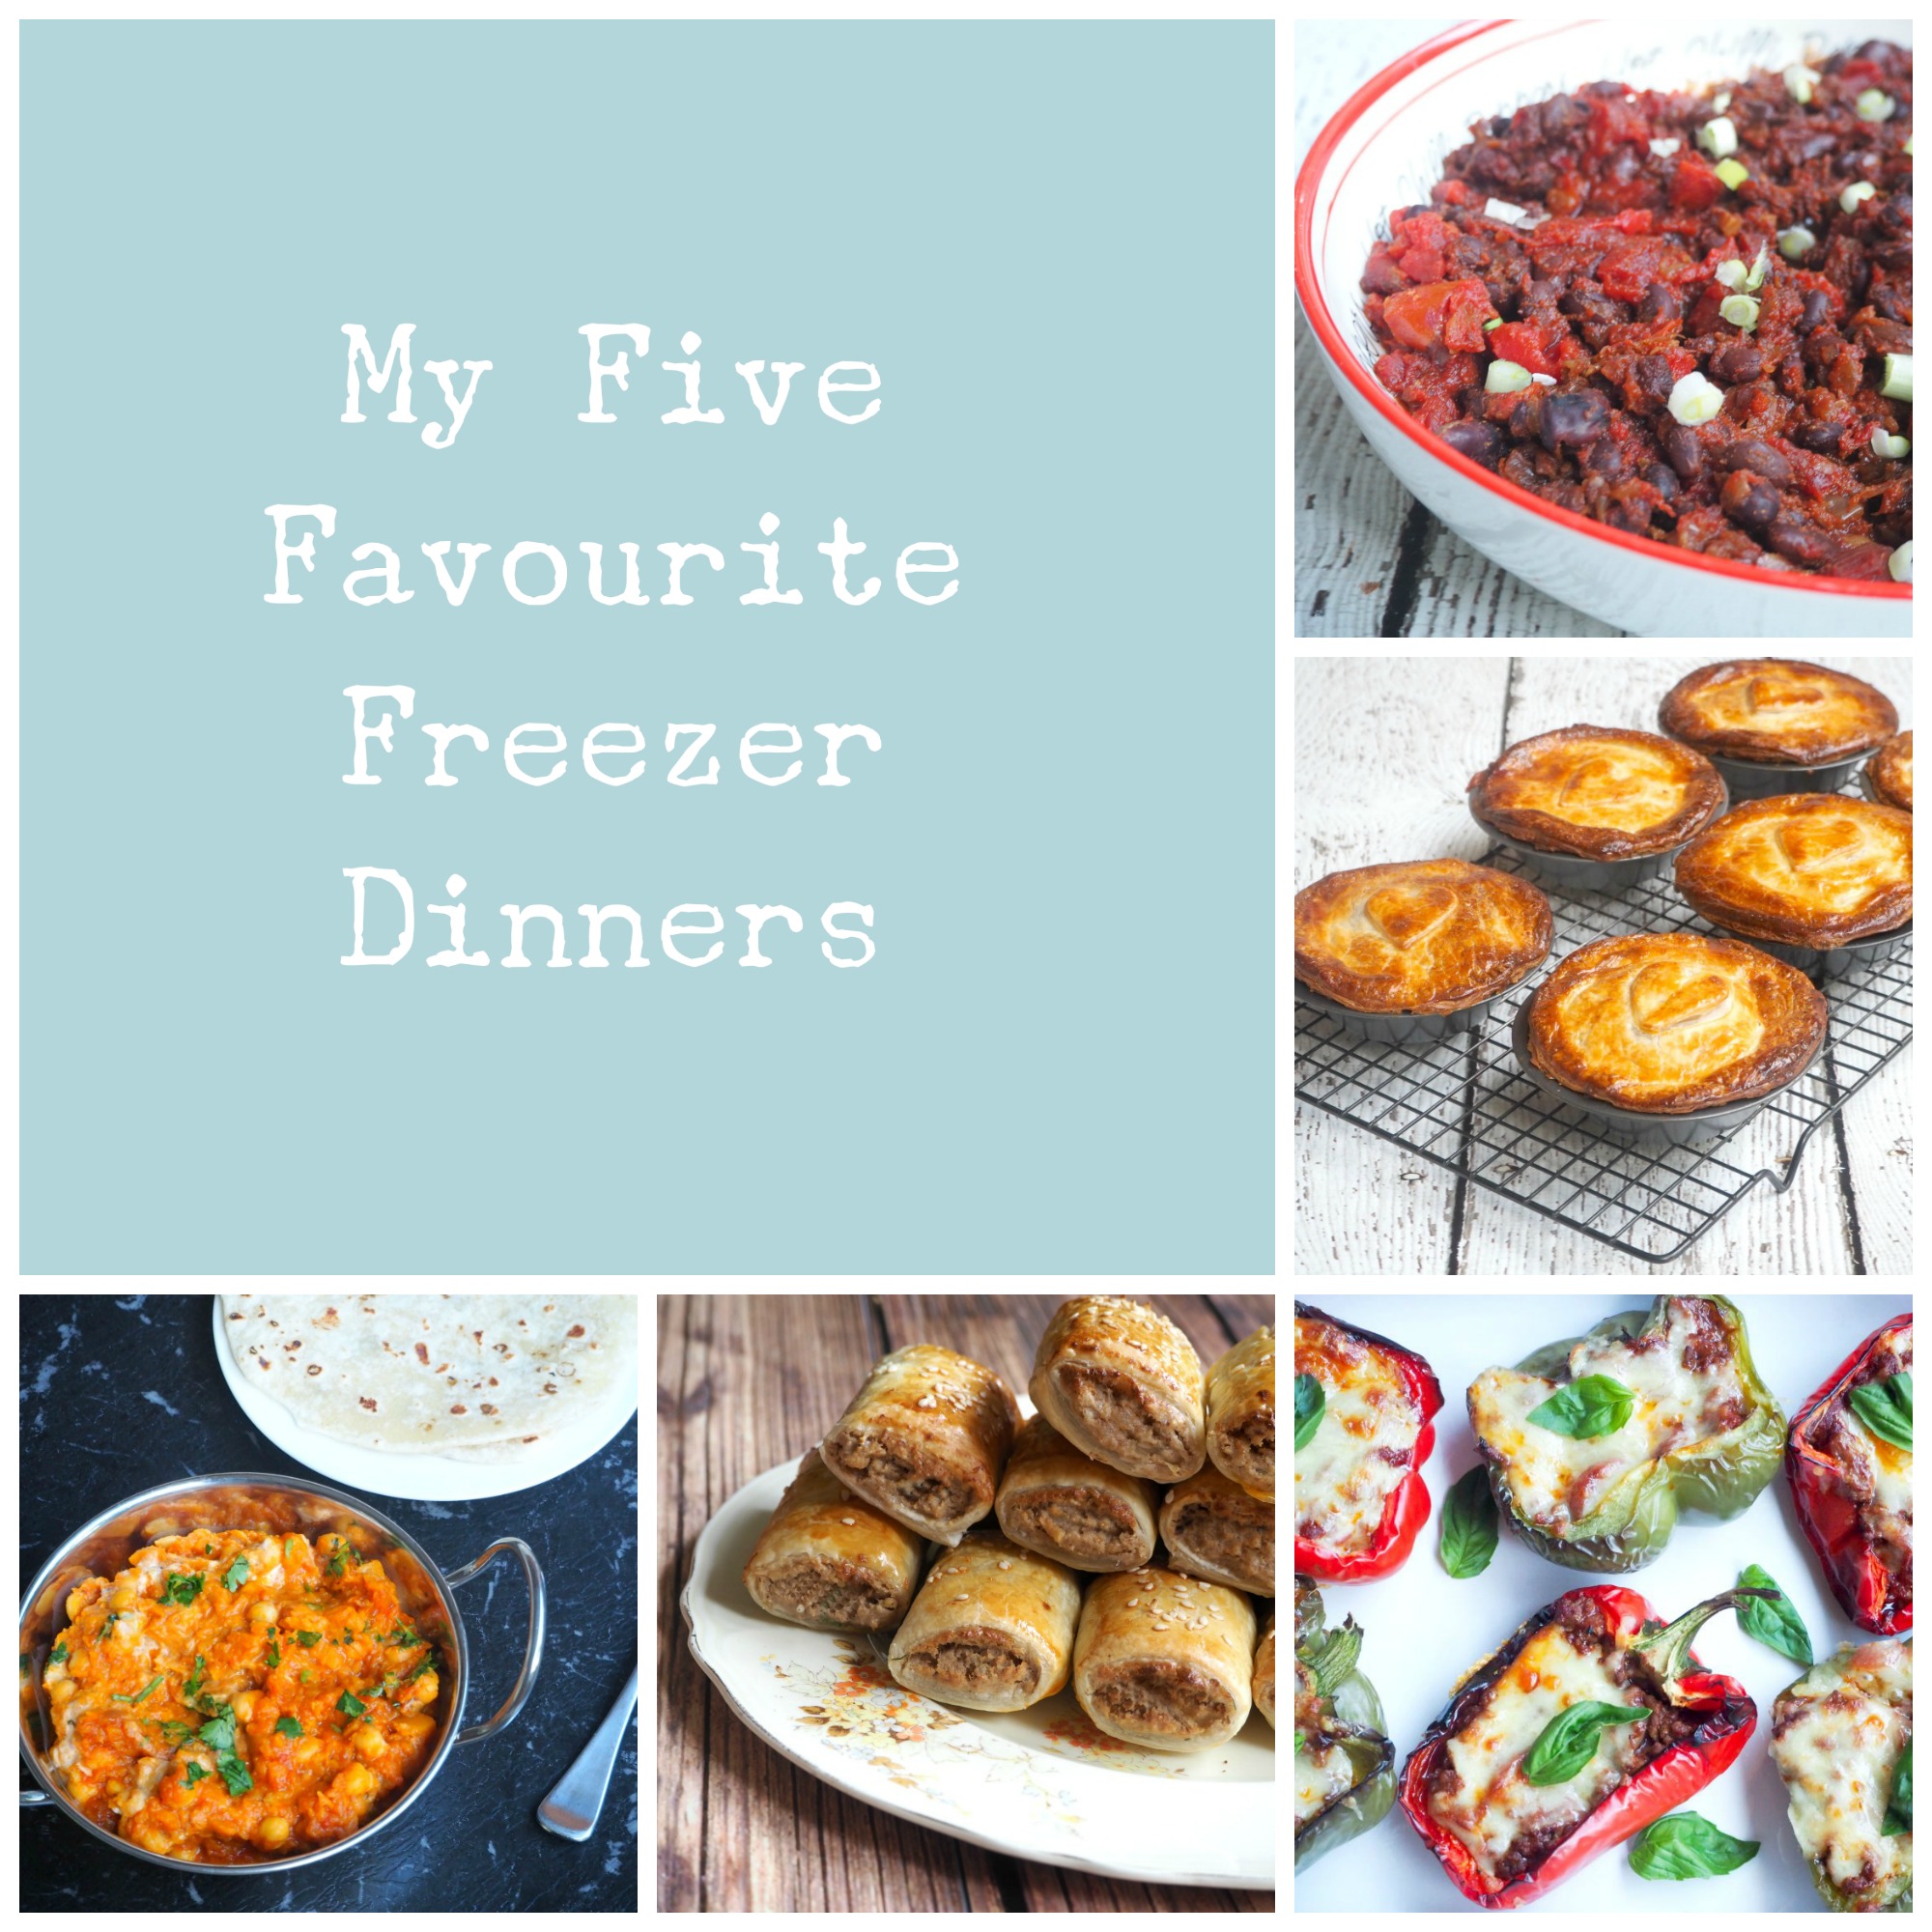 My Five Favourite Freezer Dinners | The Annoyed Thyroid